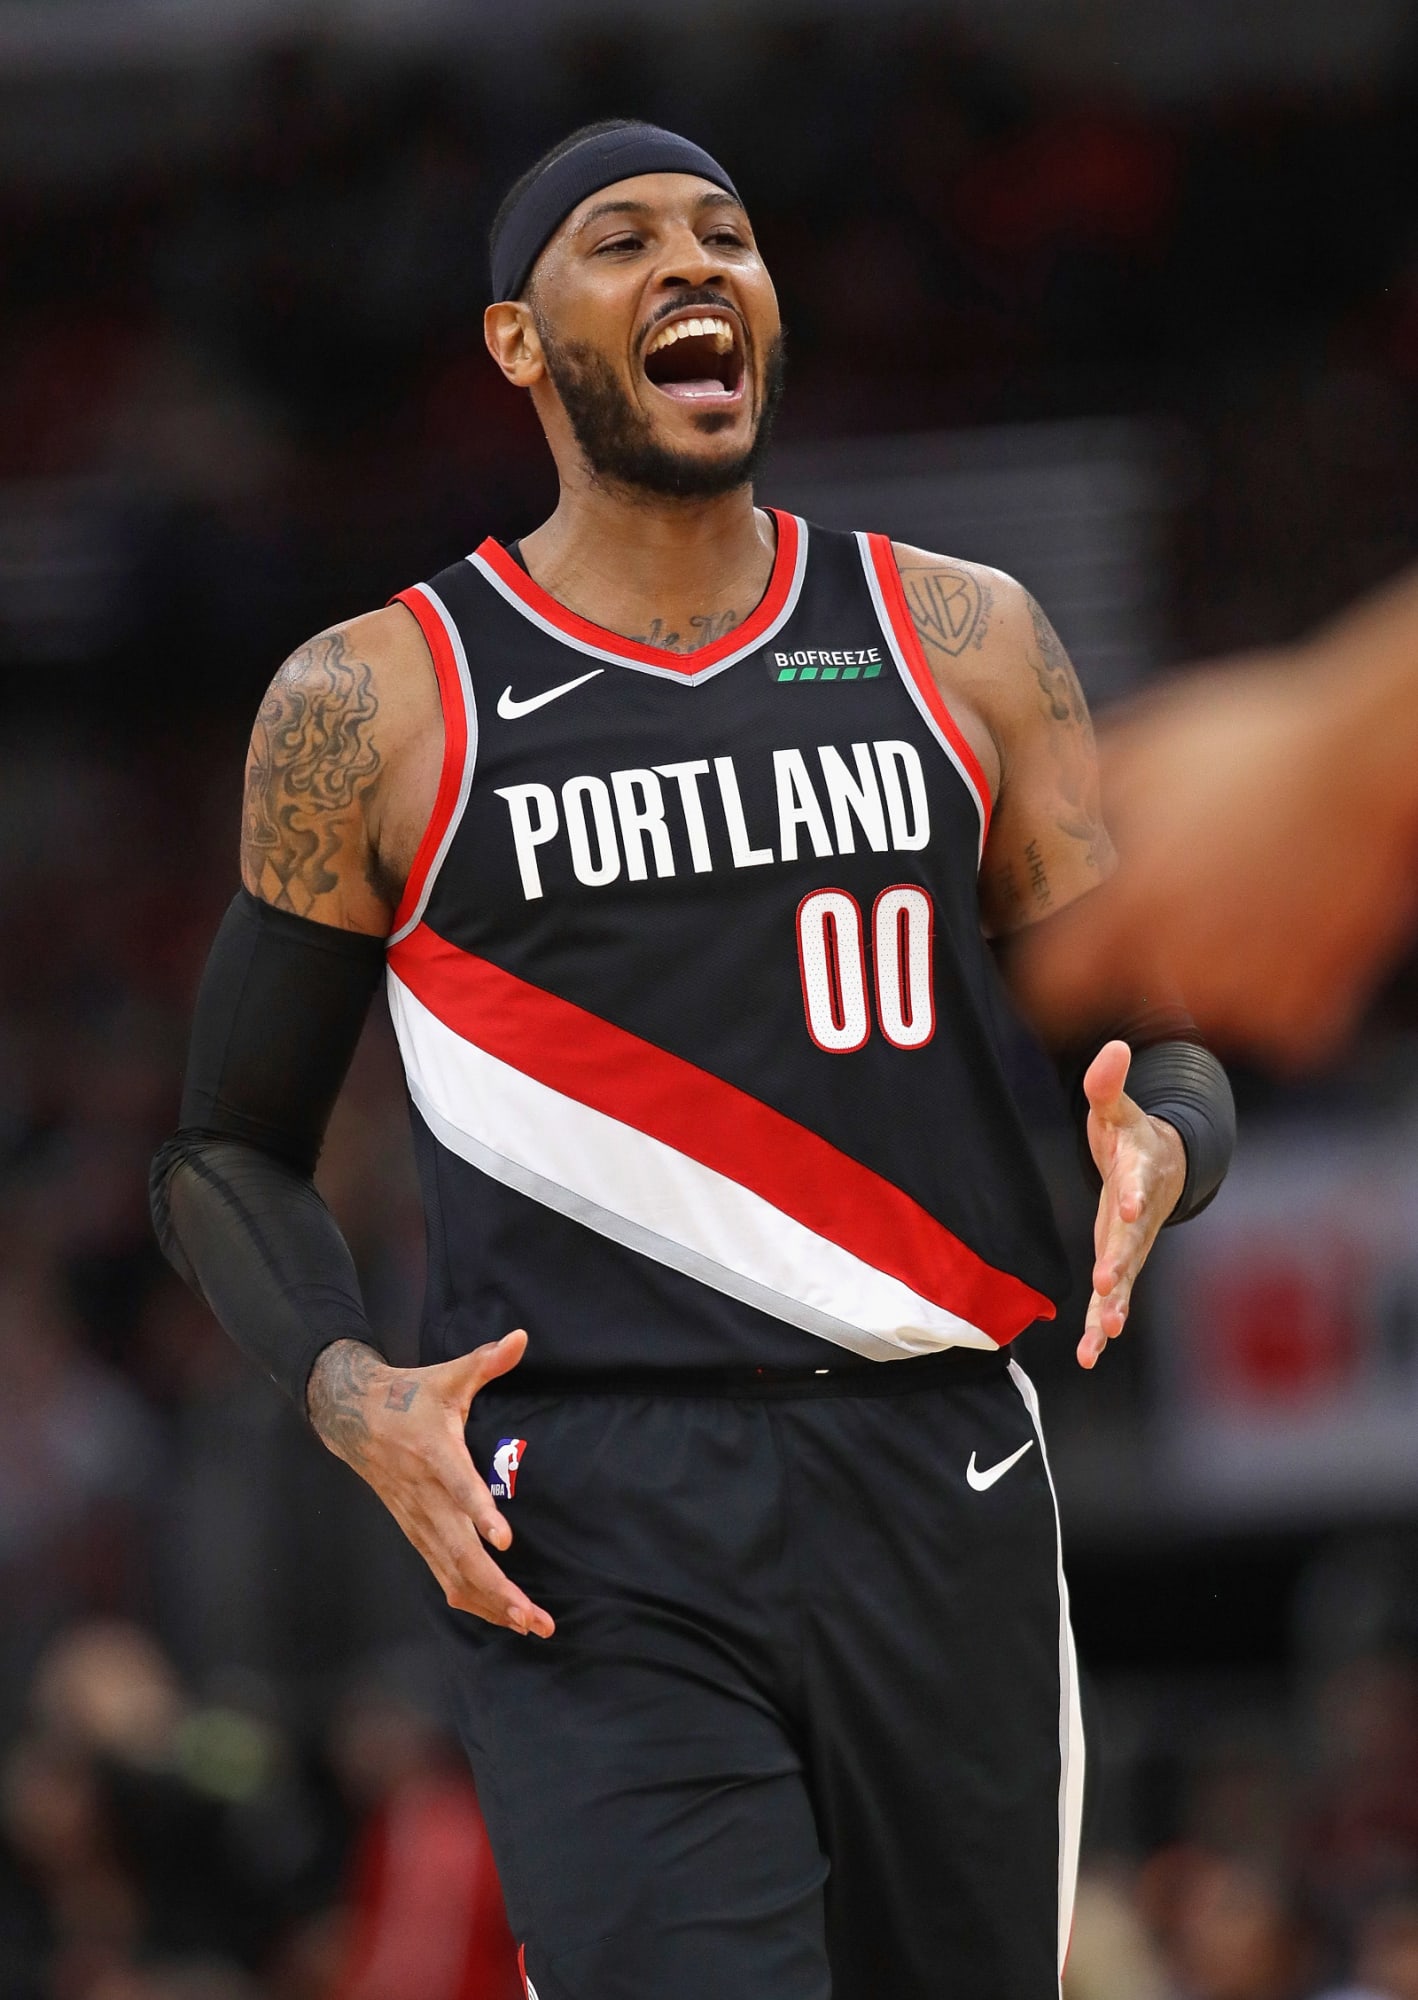 Portland Trail Blazers Carmelo Anthony continues to prove he belongs